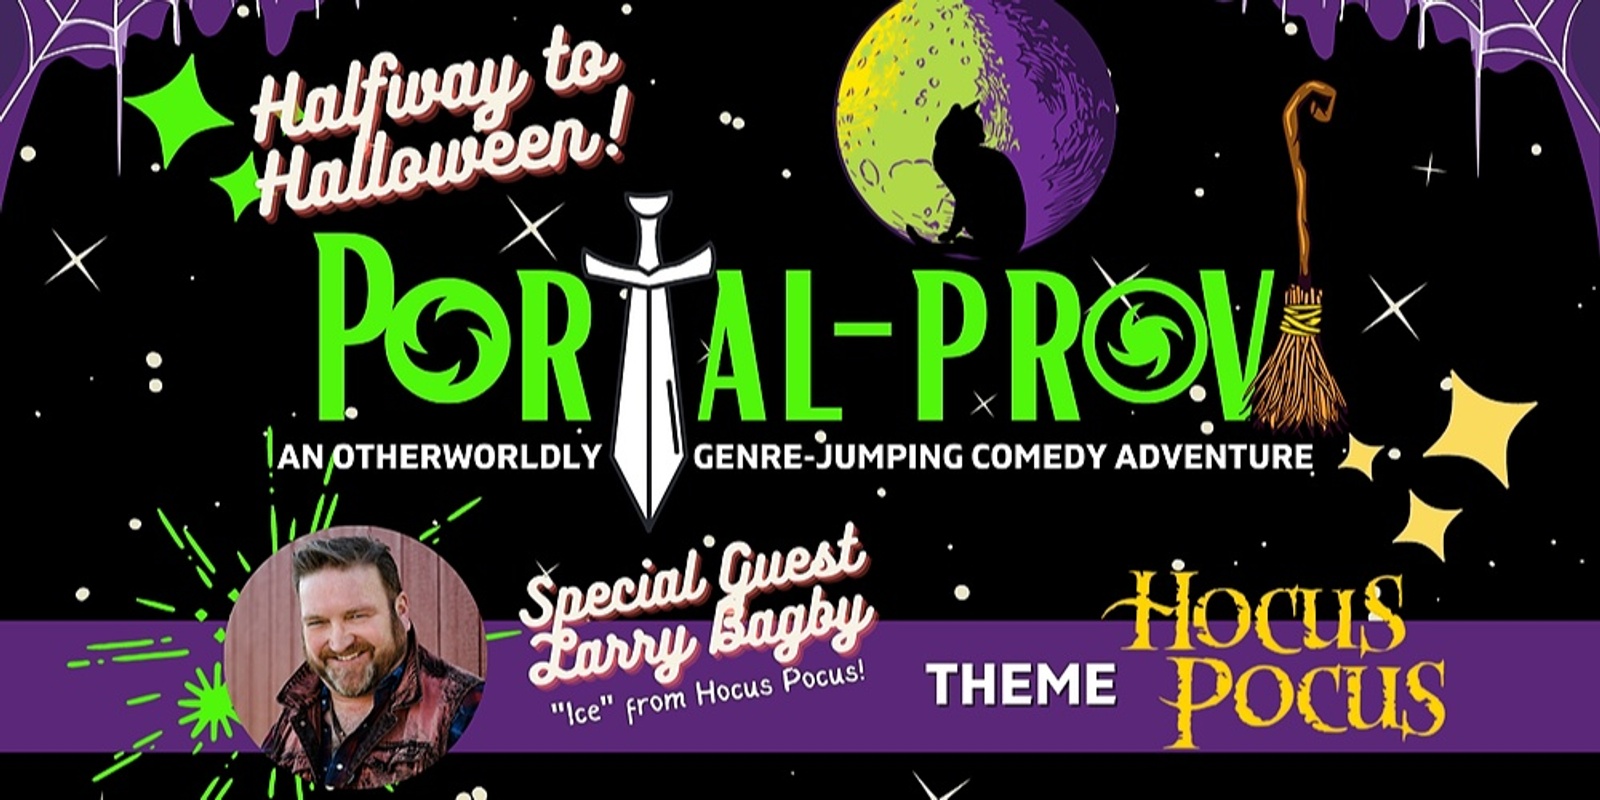 Halfway to Halloween: A Hocus-Pocus Portal-Prov! featuring Larry Bagby!